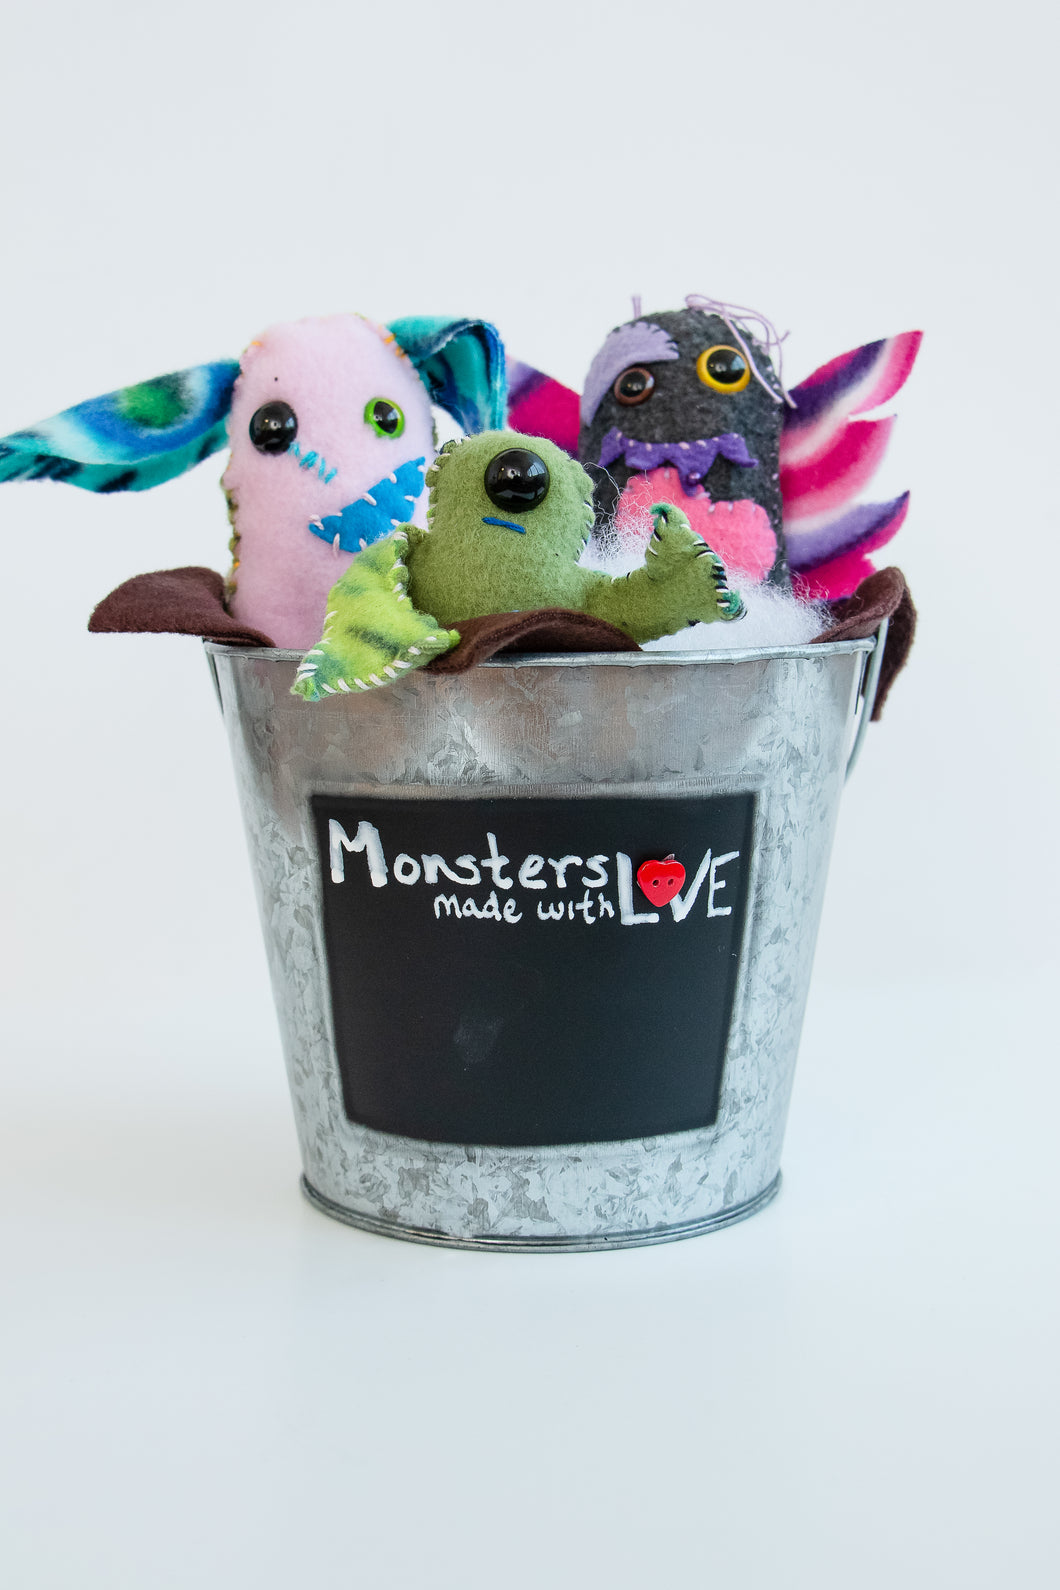 Monster Sewing 101 & Open Sew for Advanced- June 13th, 14th, 15th -1:15 to 3:15 - Afternoon Class